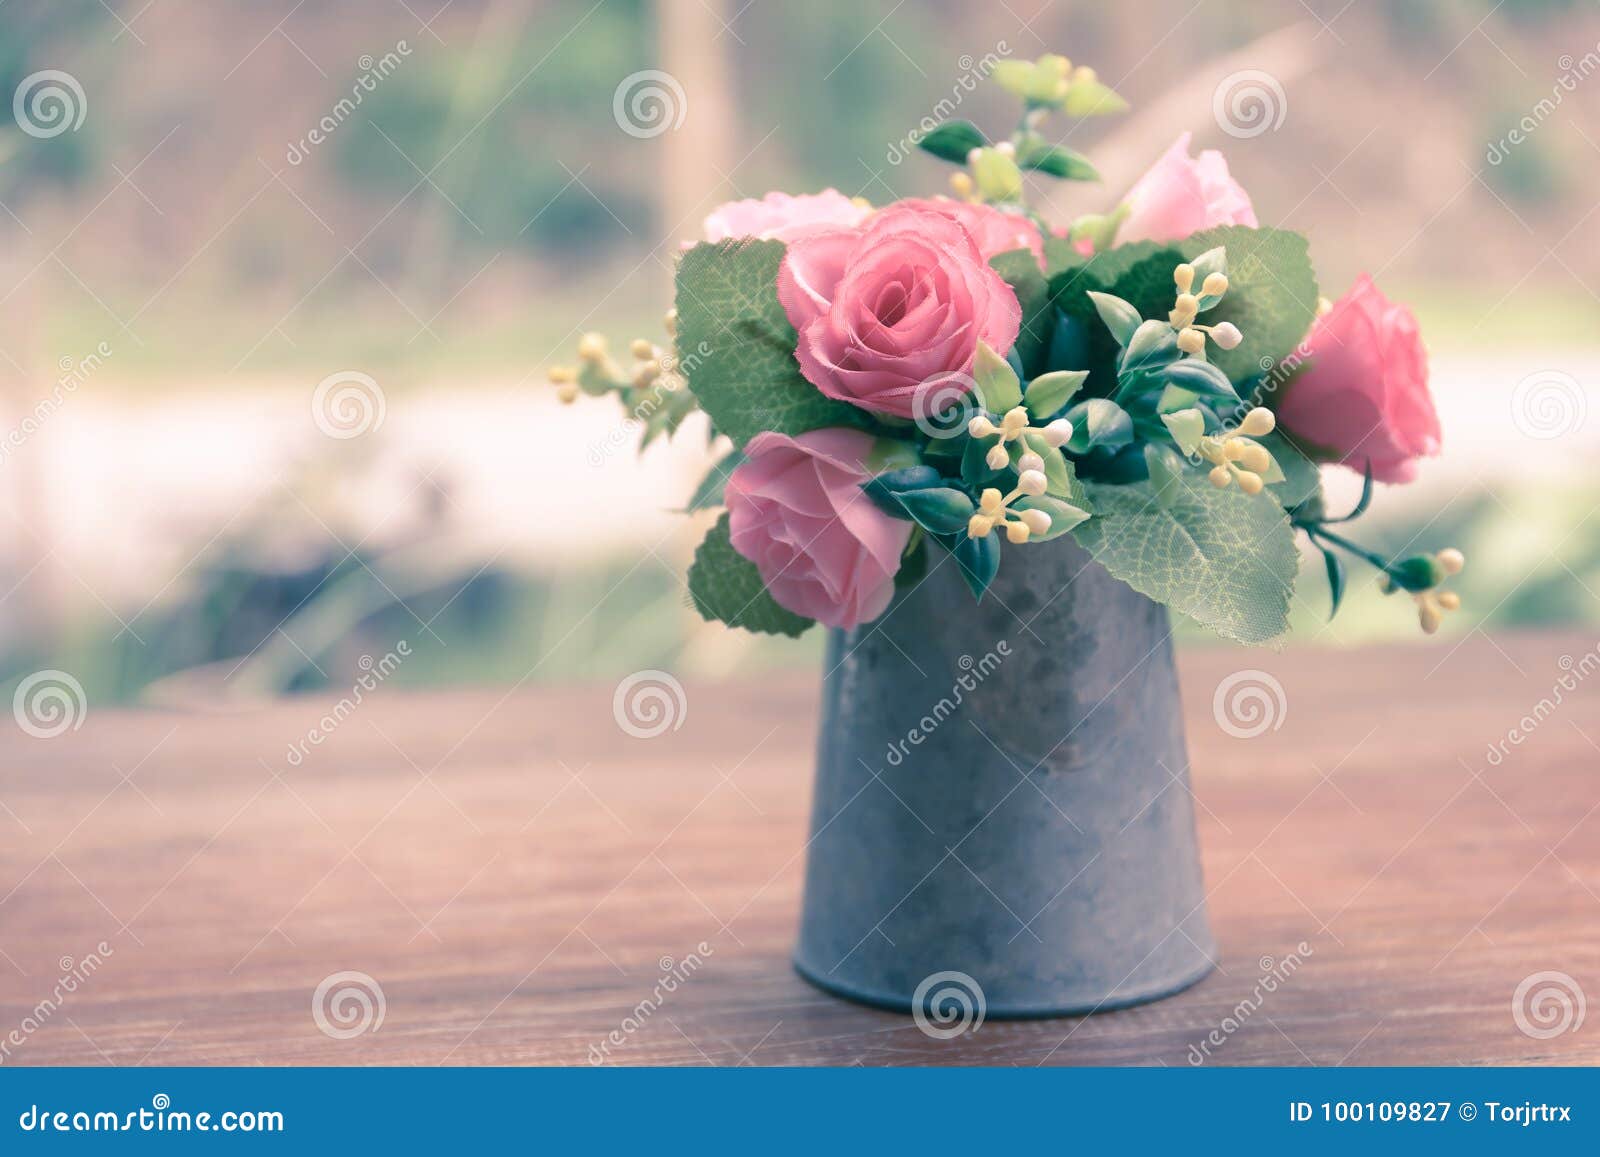 Vintage Flowers Beautiful Soft Pink Roses In Vase Stock Image Image Of Arty Floral 100109827